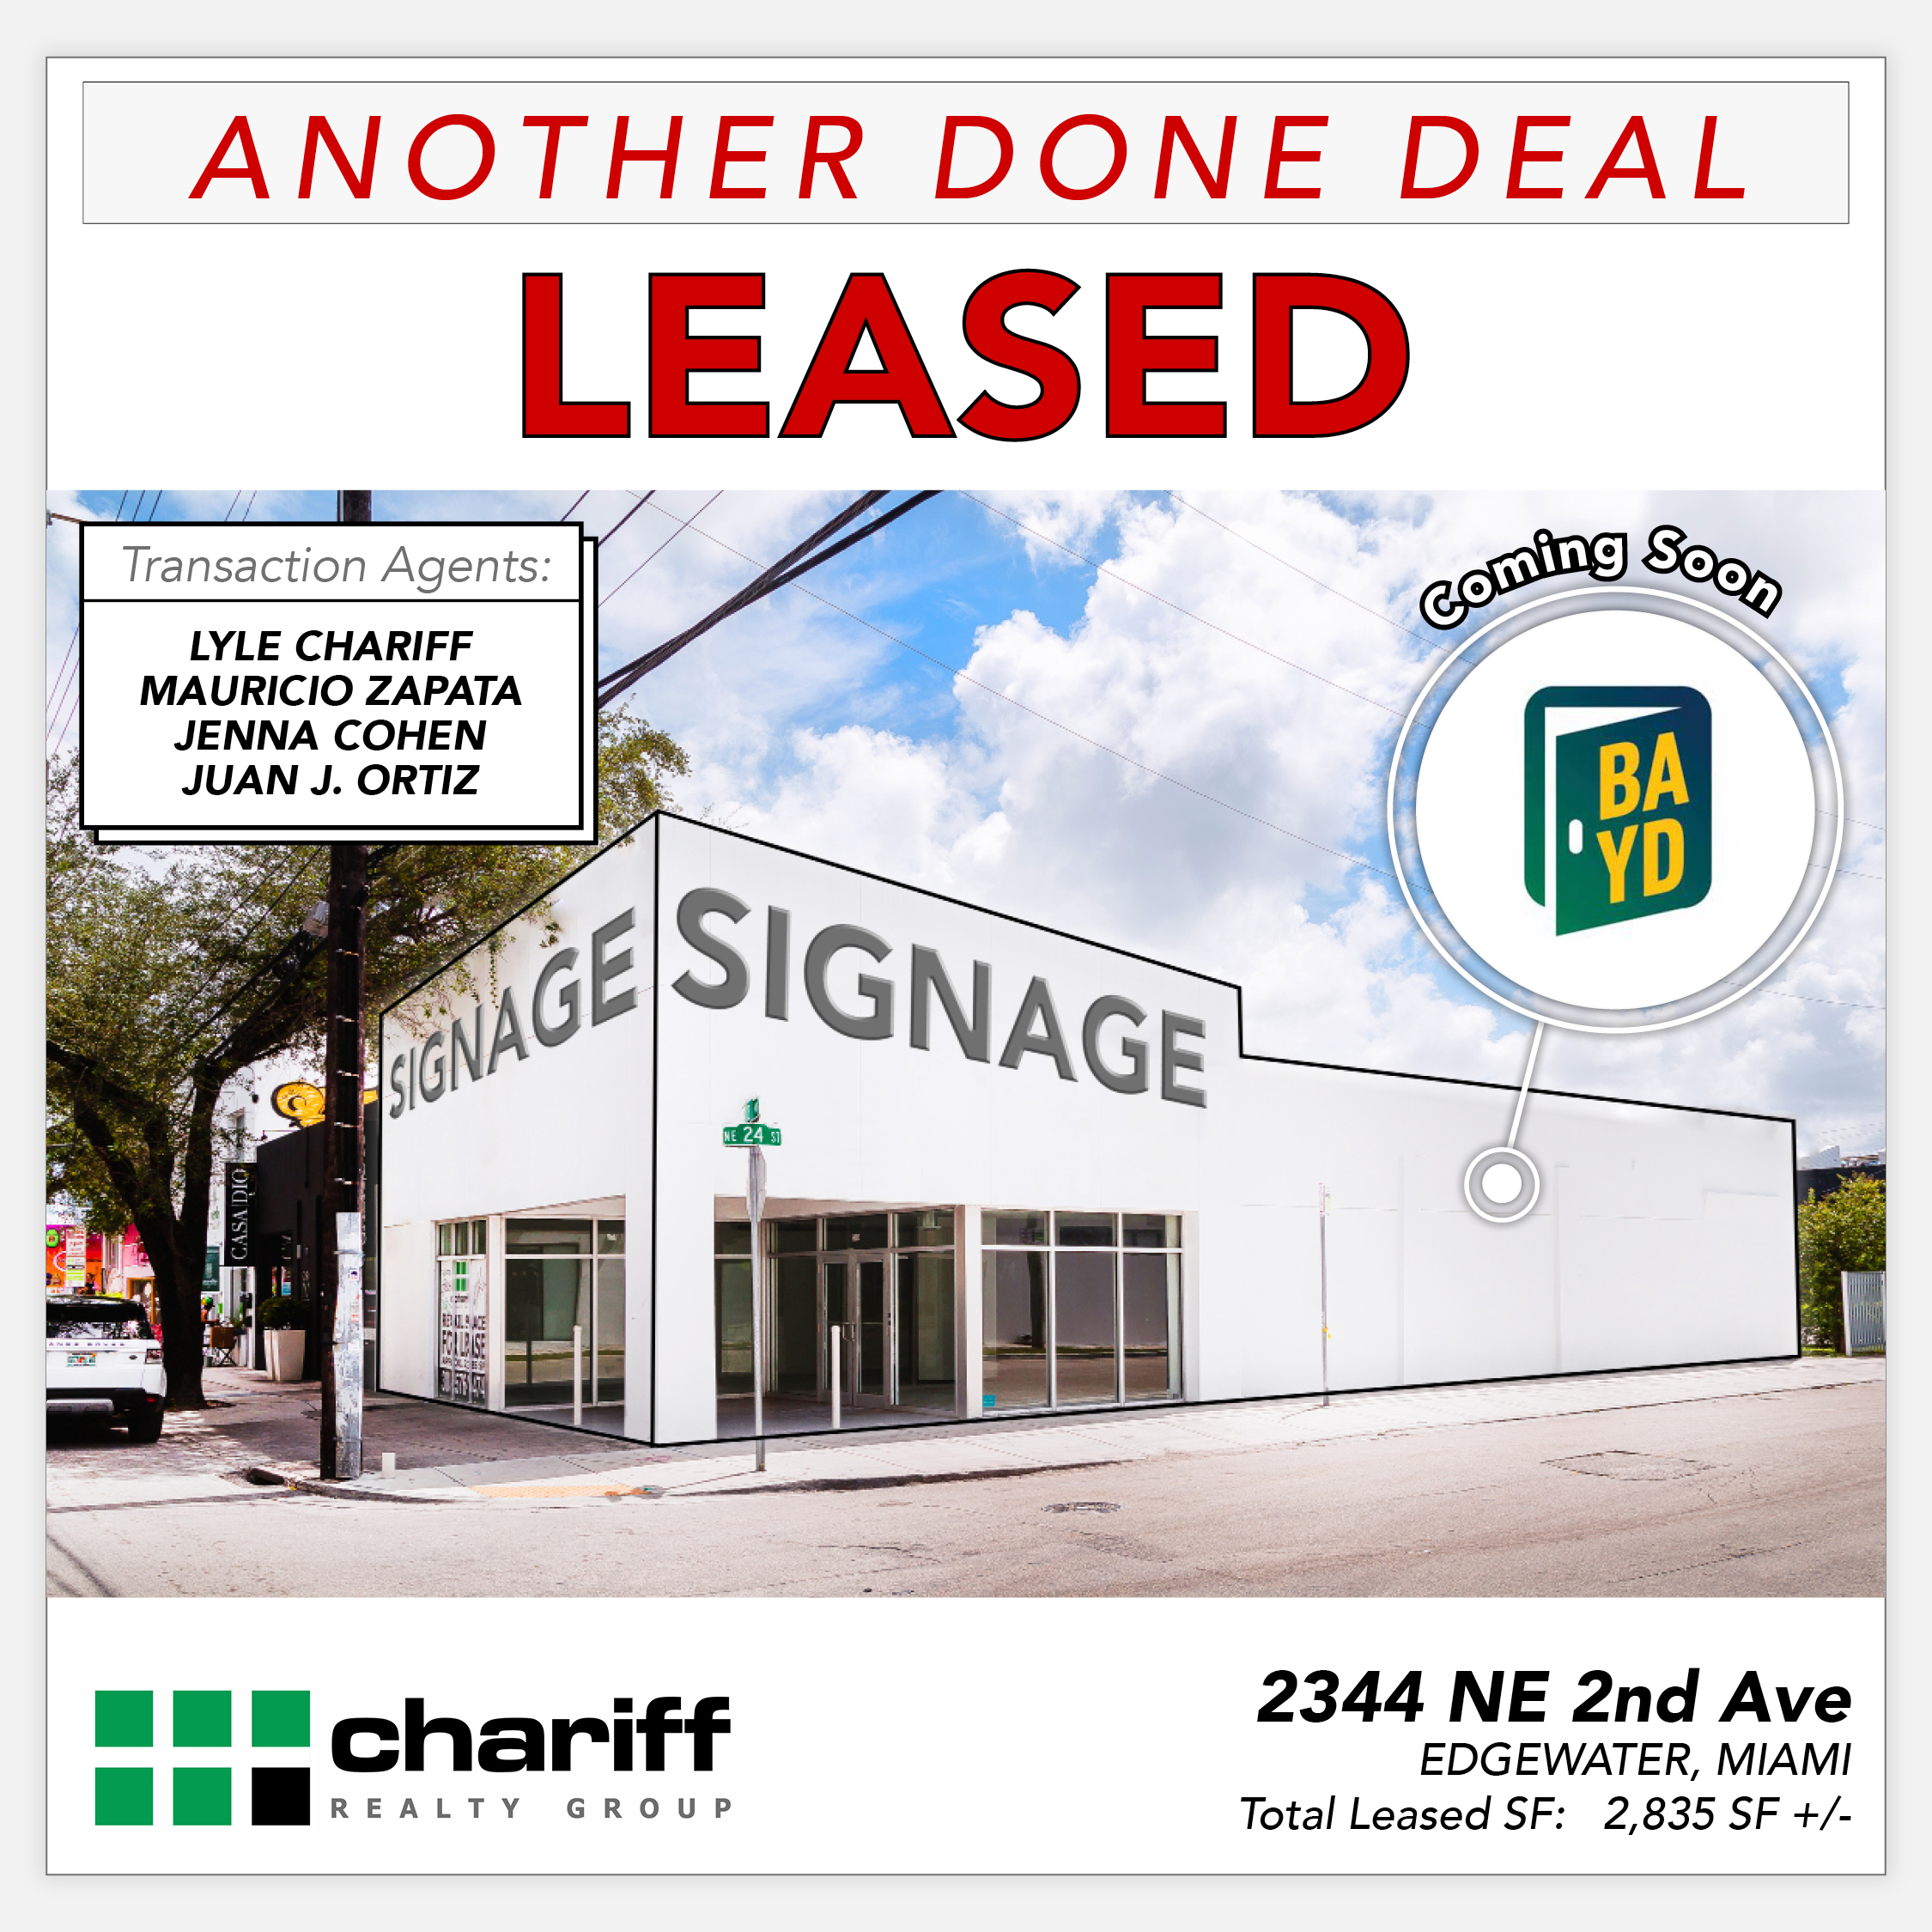 2344 NE 2nd Ave - Another Done Deal - Leased - Edgewater - Miami-Florida-33137-Chariff Realty Group